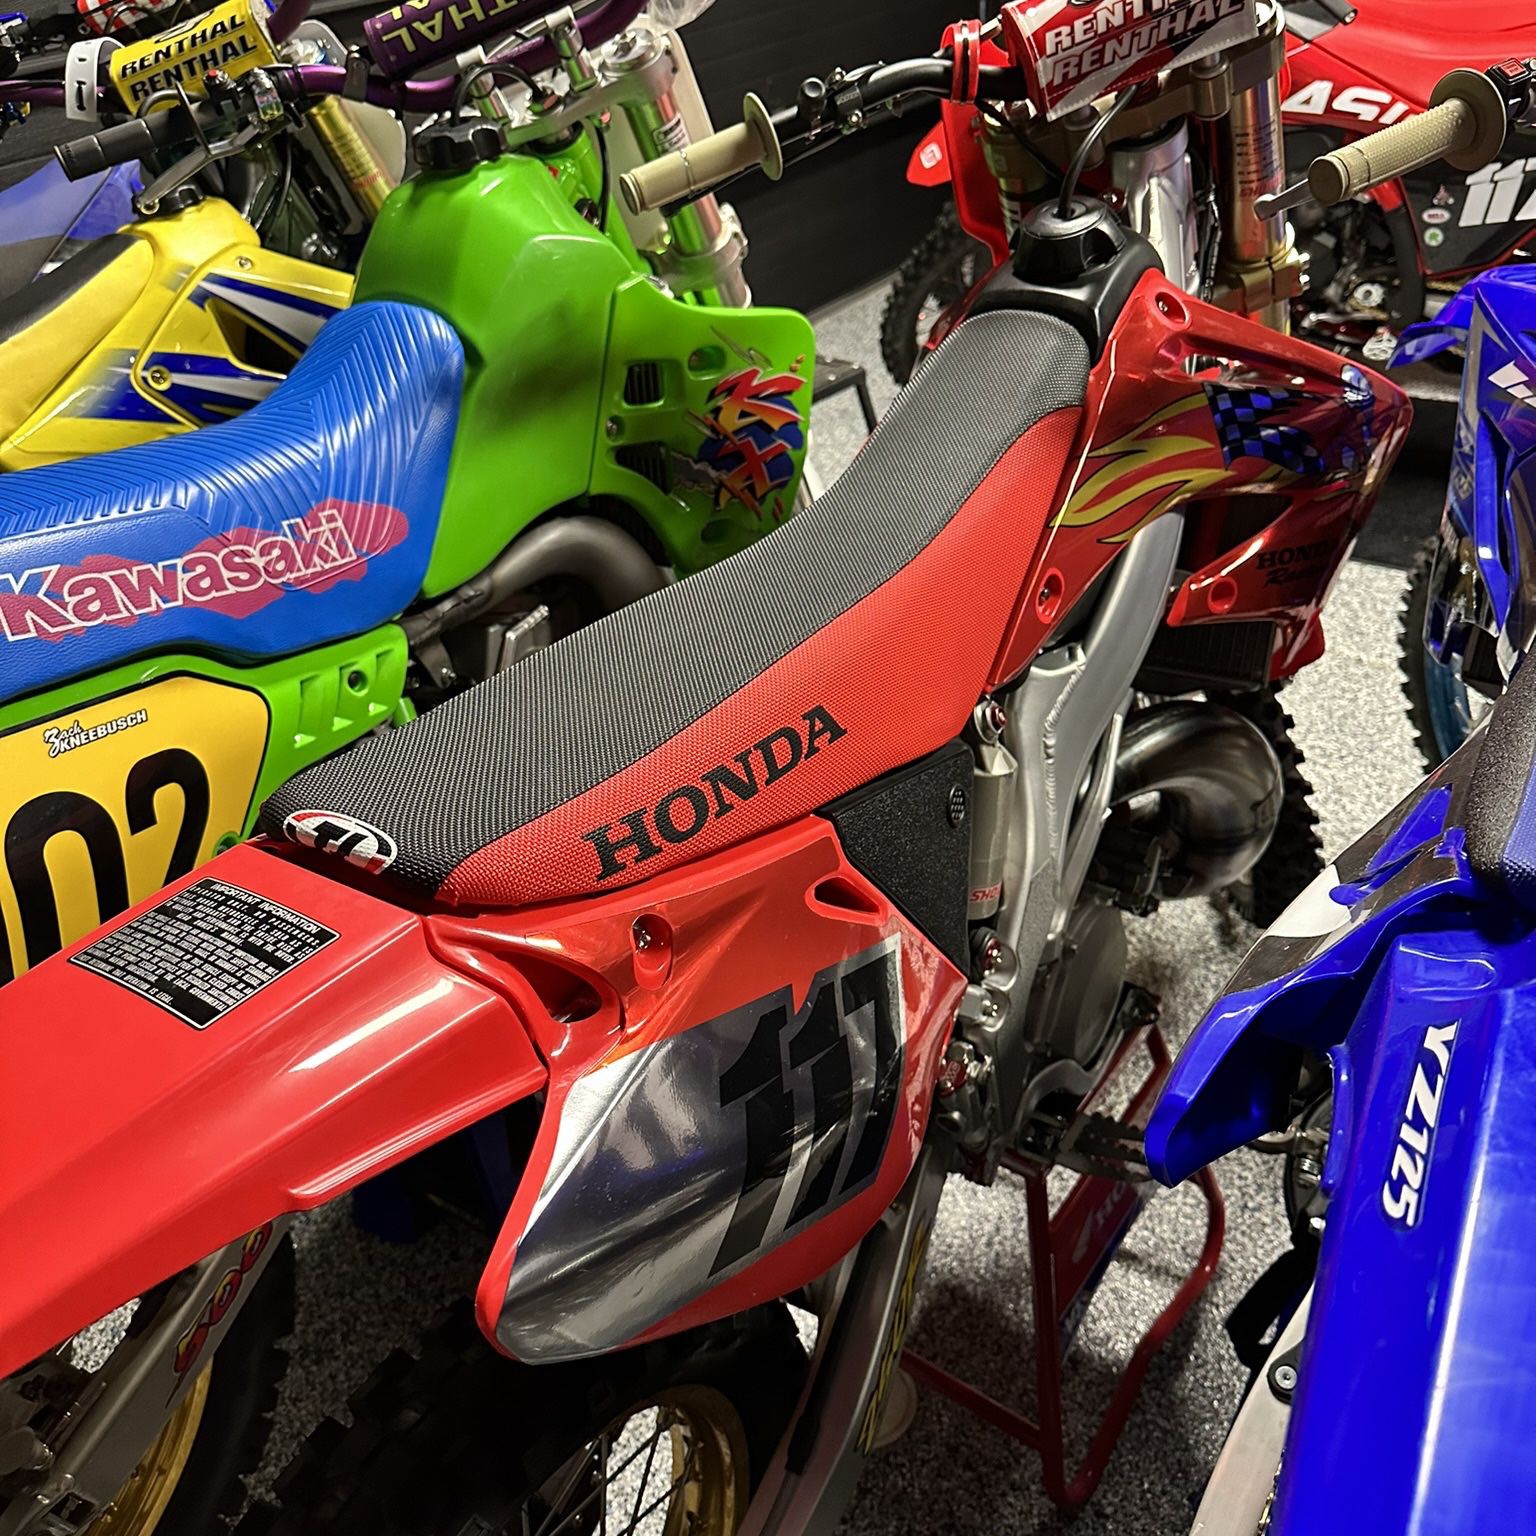 I WANT TO BUY DIRT BIKES!